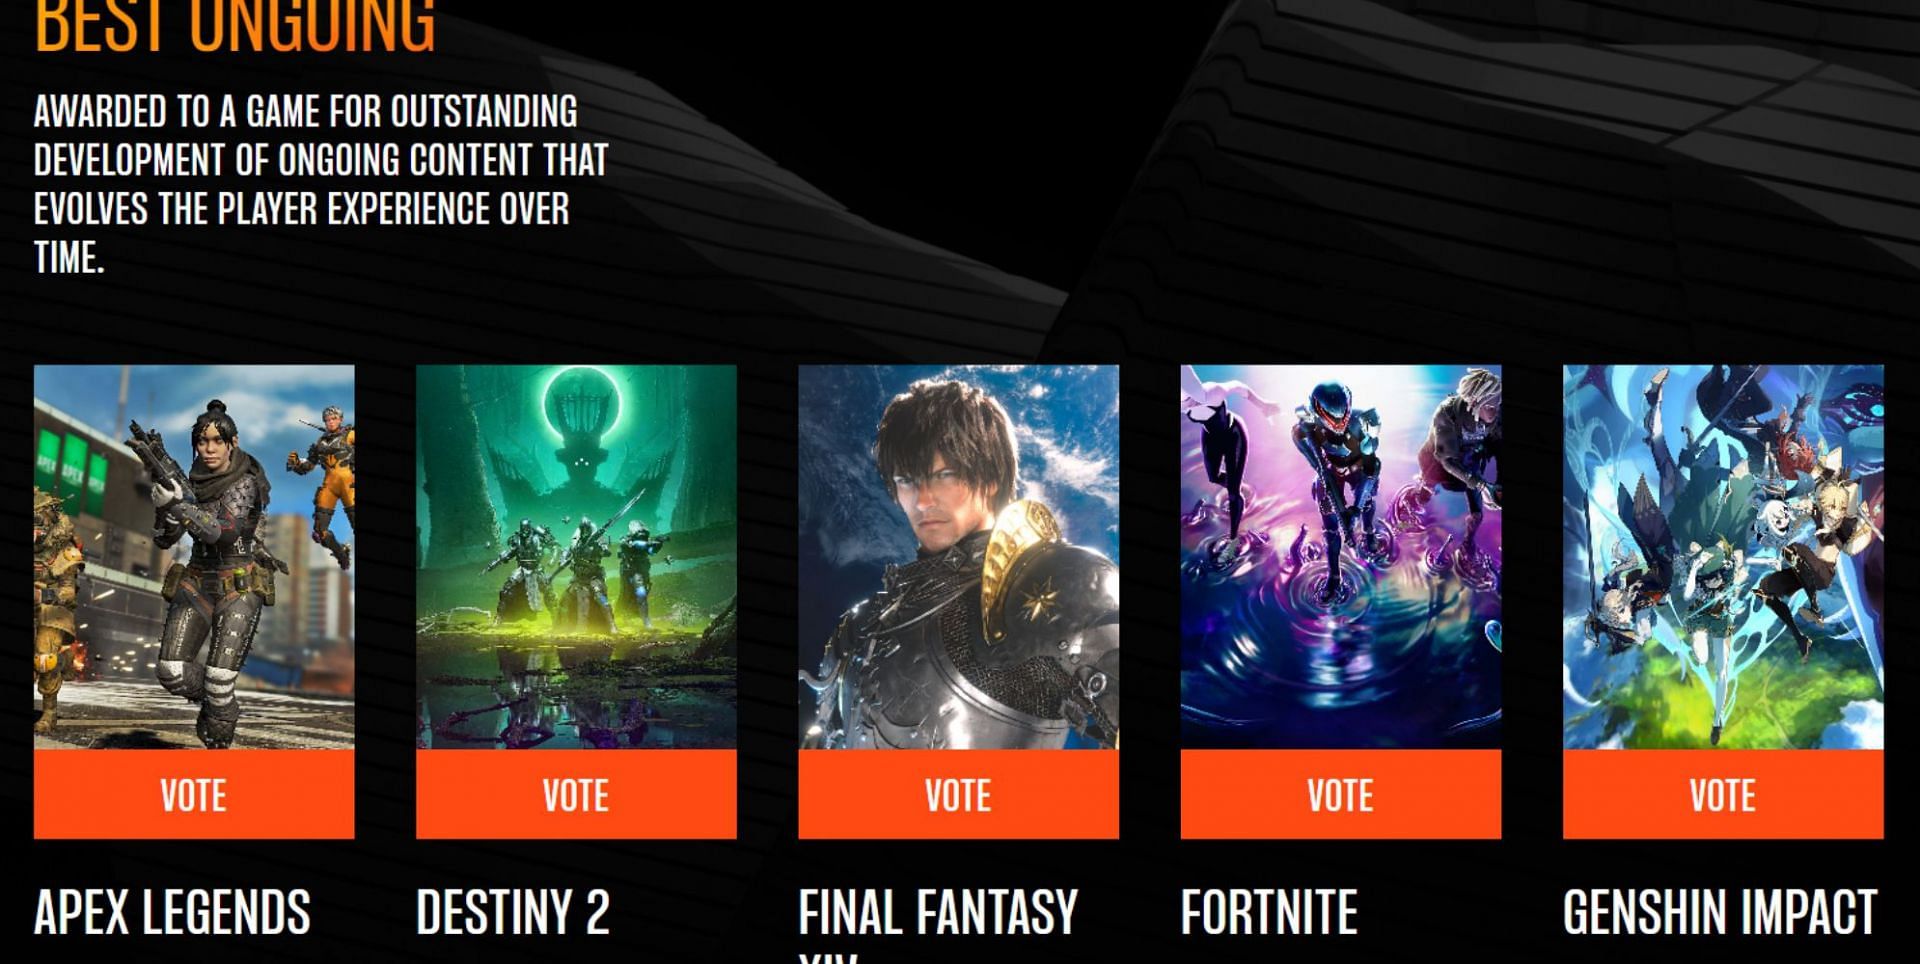 The Best Ongoing Game category (Image via TGA)